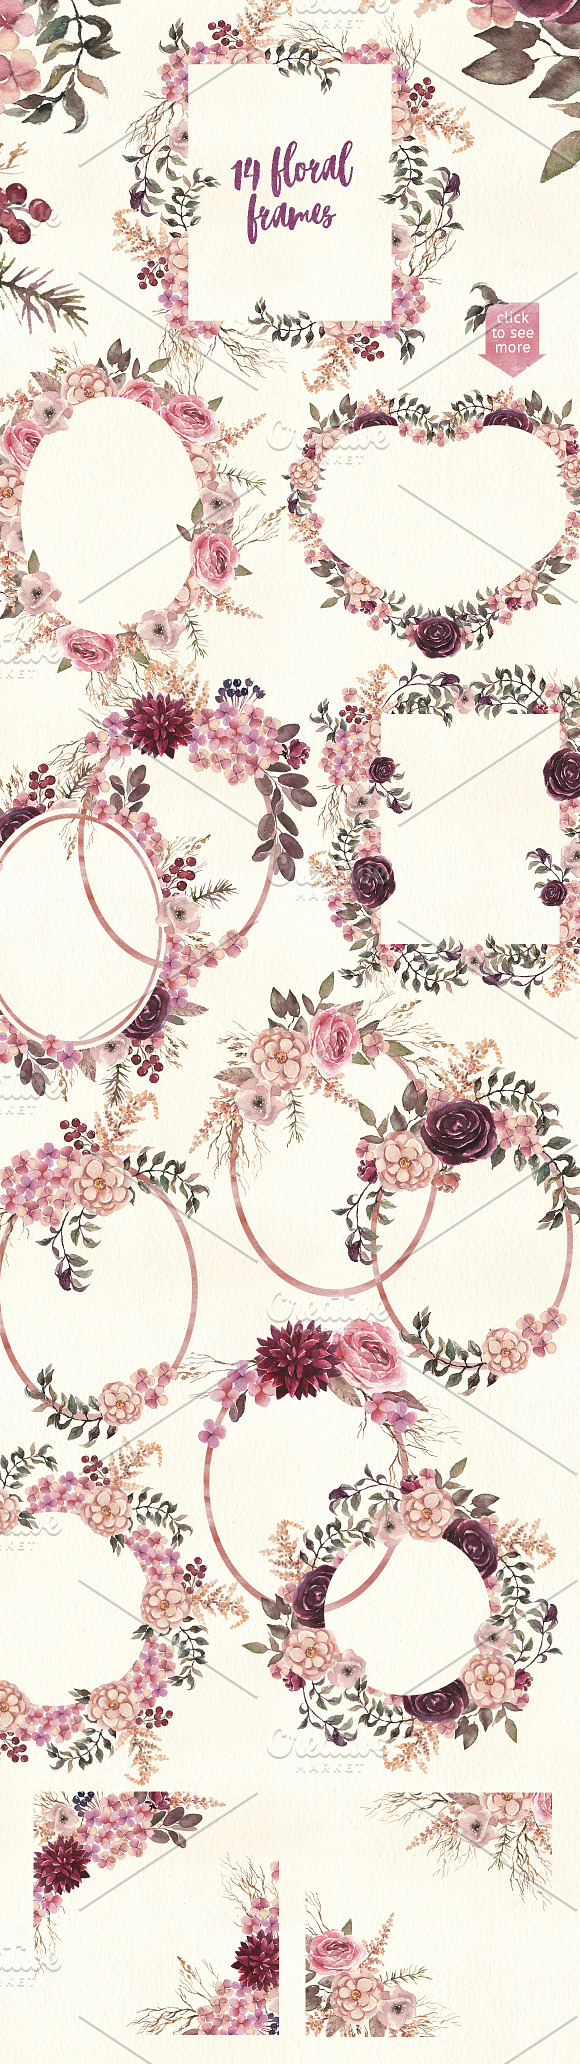 70%OFF Burgundy & Cream Floral Pack in Illustrations - product preview 4